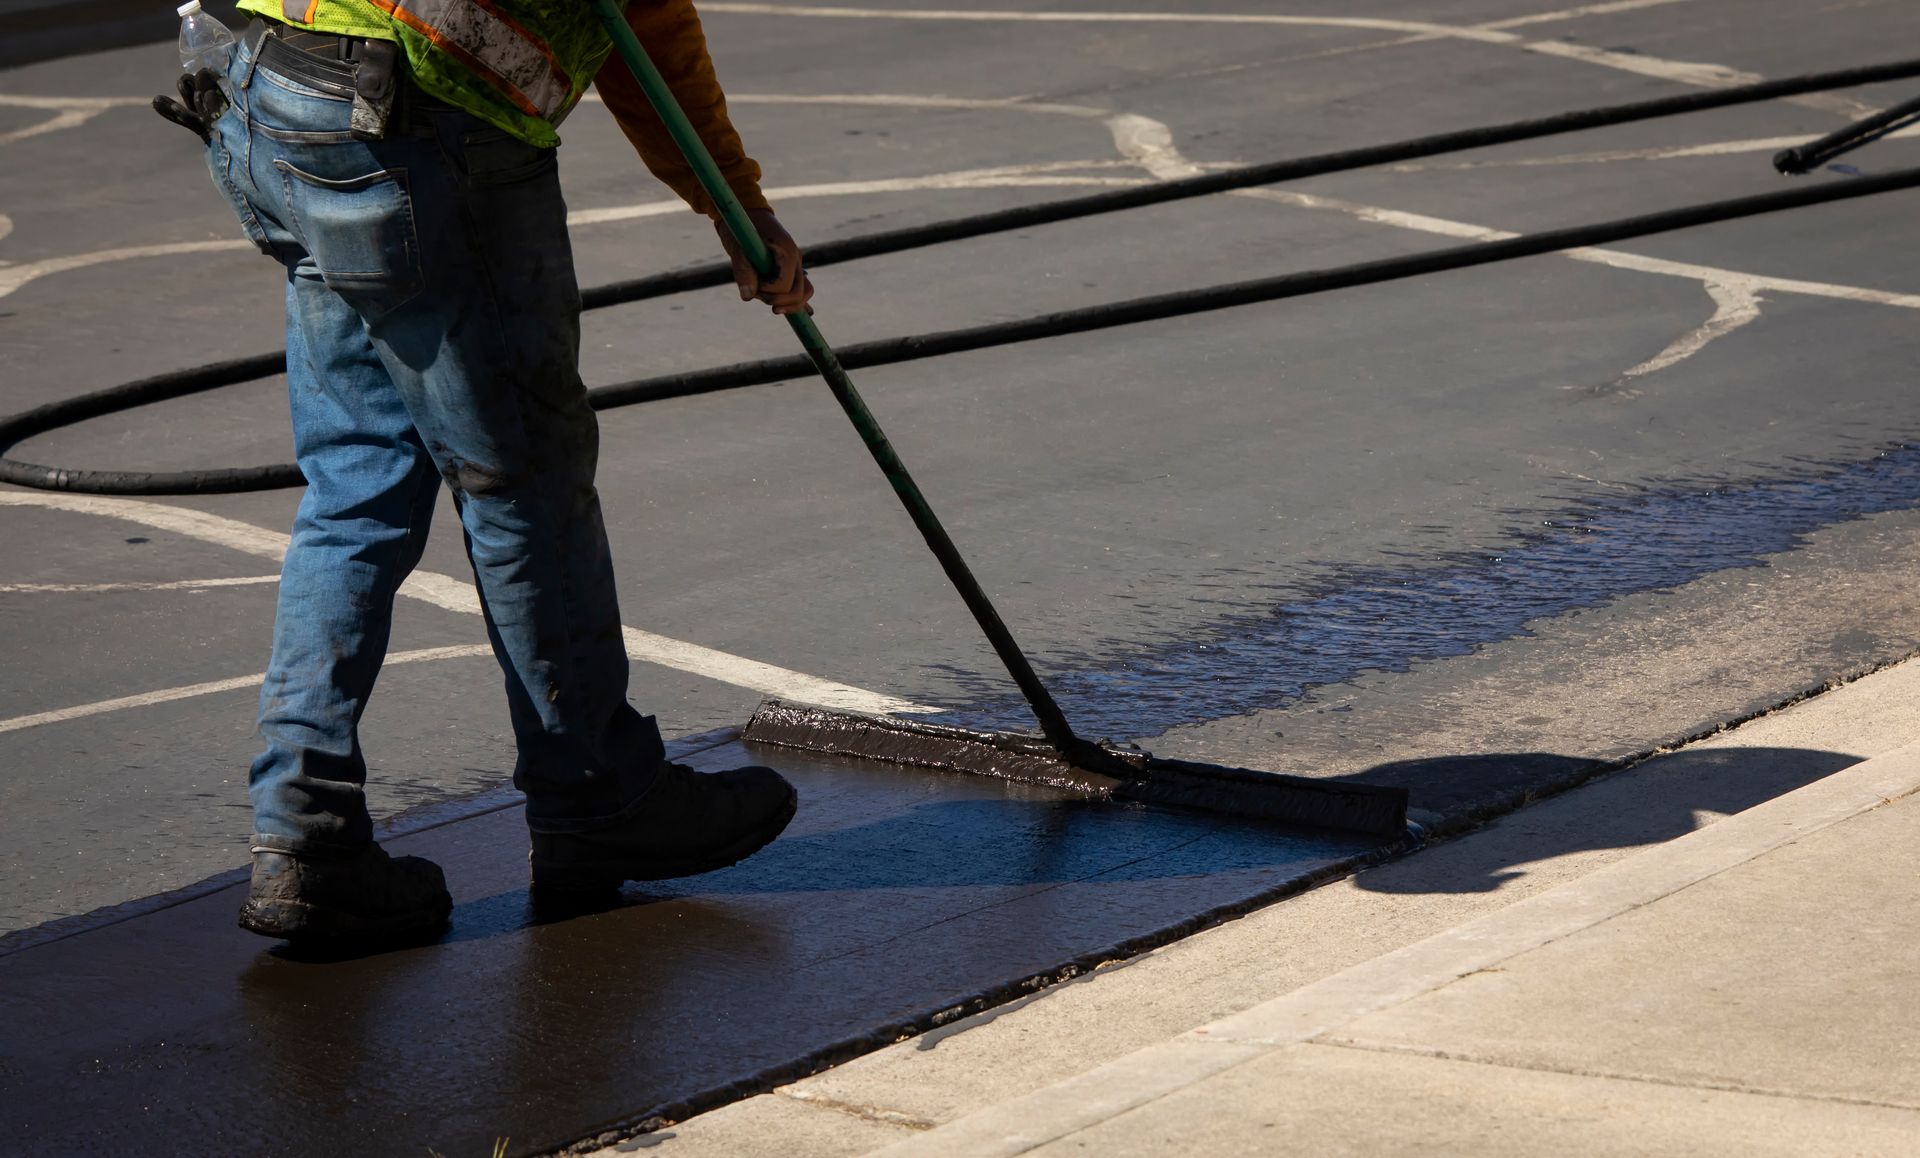 Worker applying sealcoating using a brush to resurface asphalt during a project.